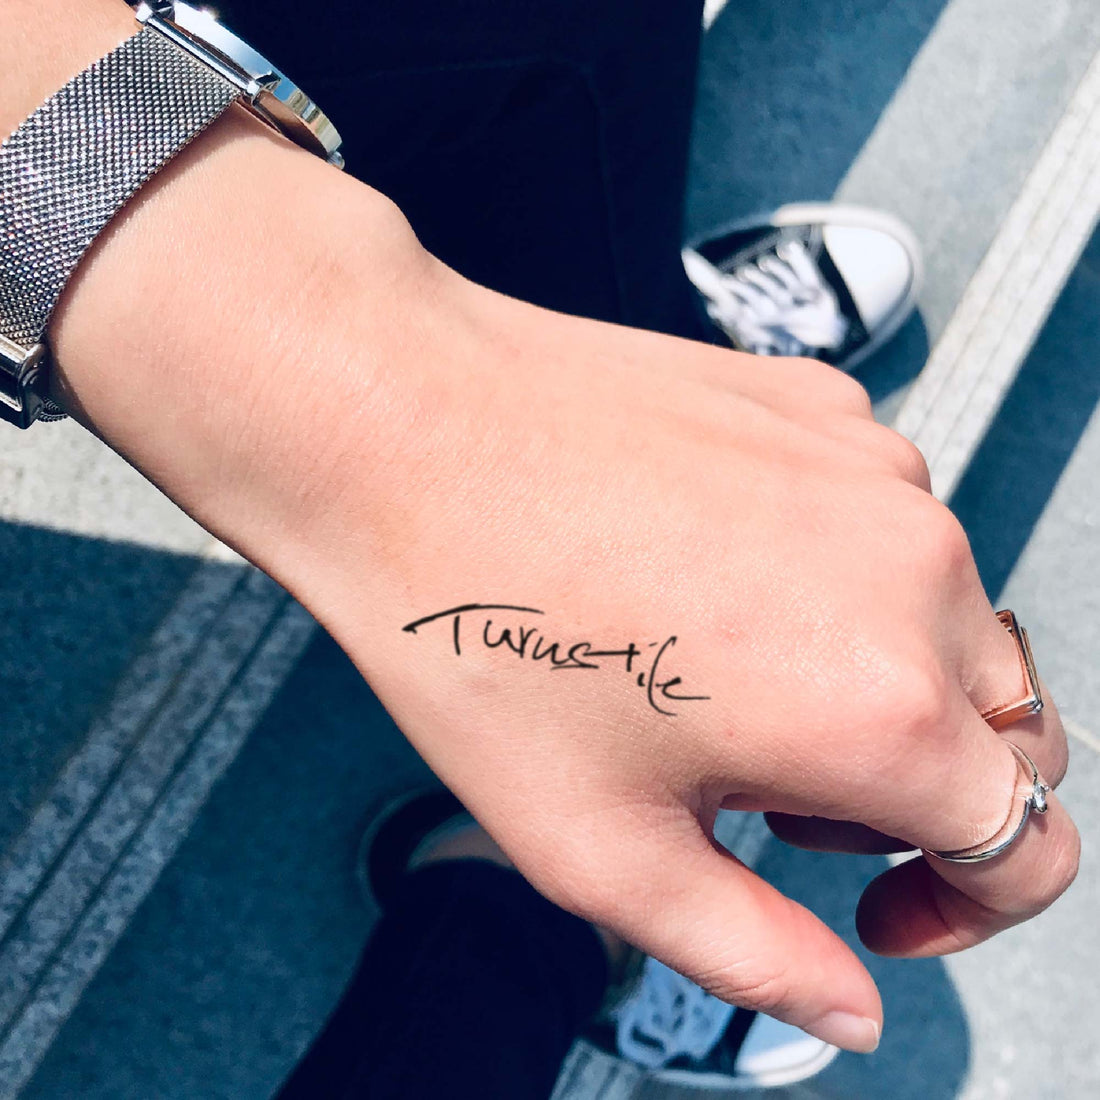 Turnstile custom temporary tattoo sticker design idea inspiration meanings removal arm wrist hand words font name signature calligraphy lyrics tour concert outfits merch accessory gift souvenir costumes wear dress up code